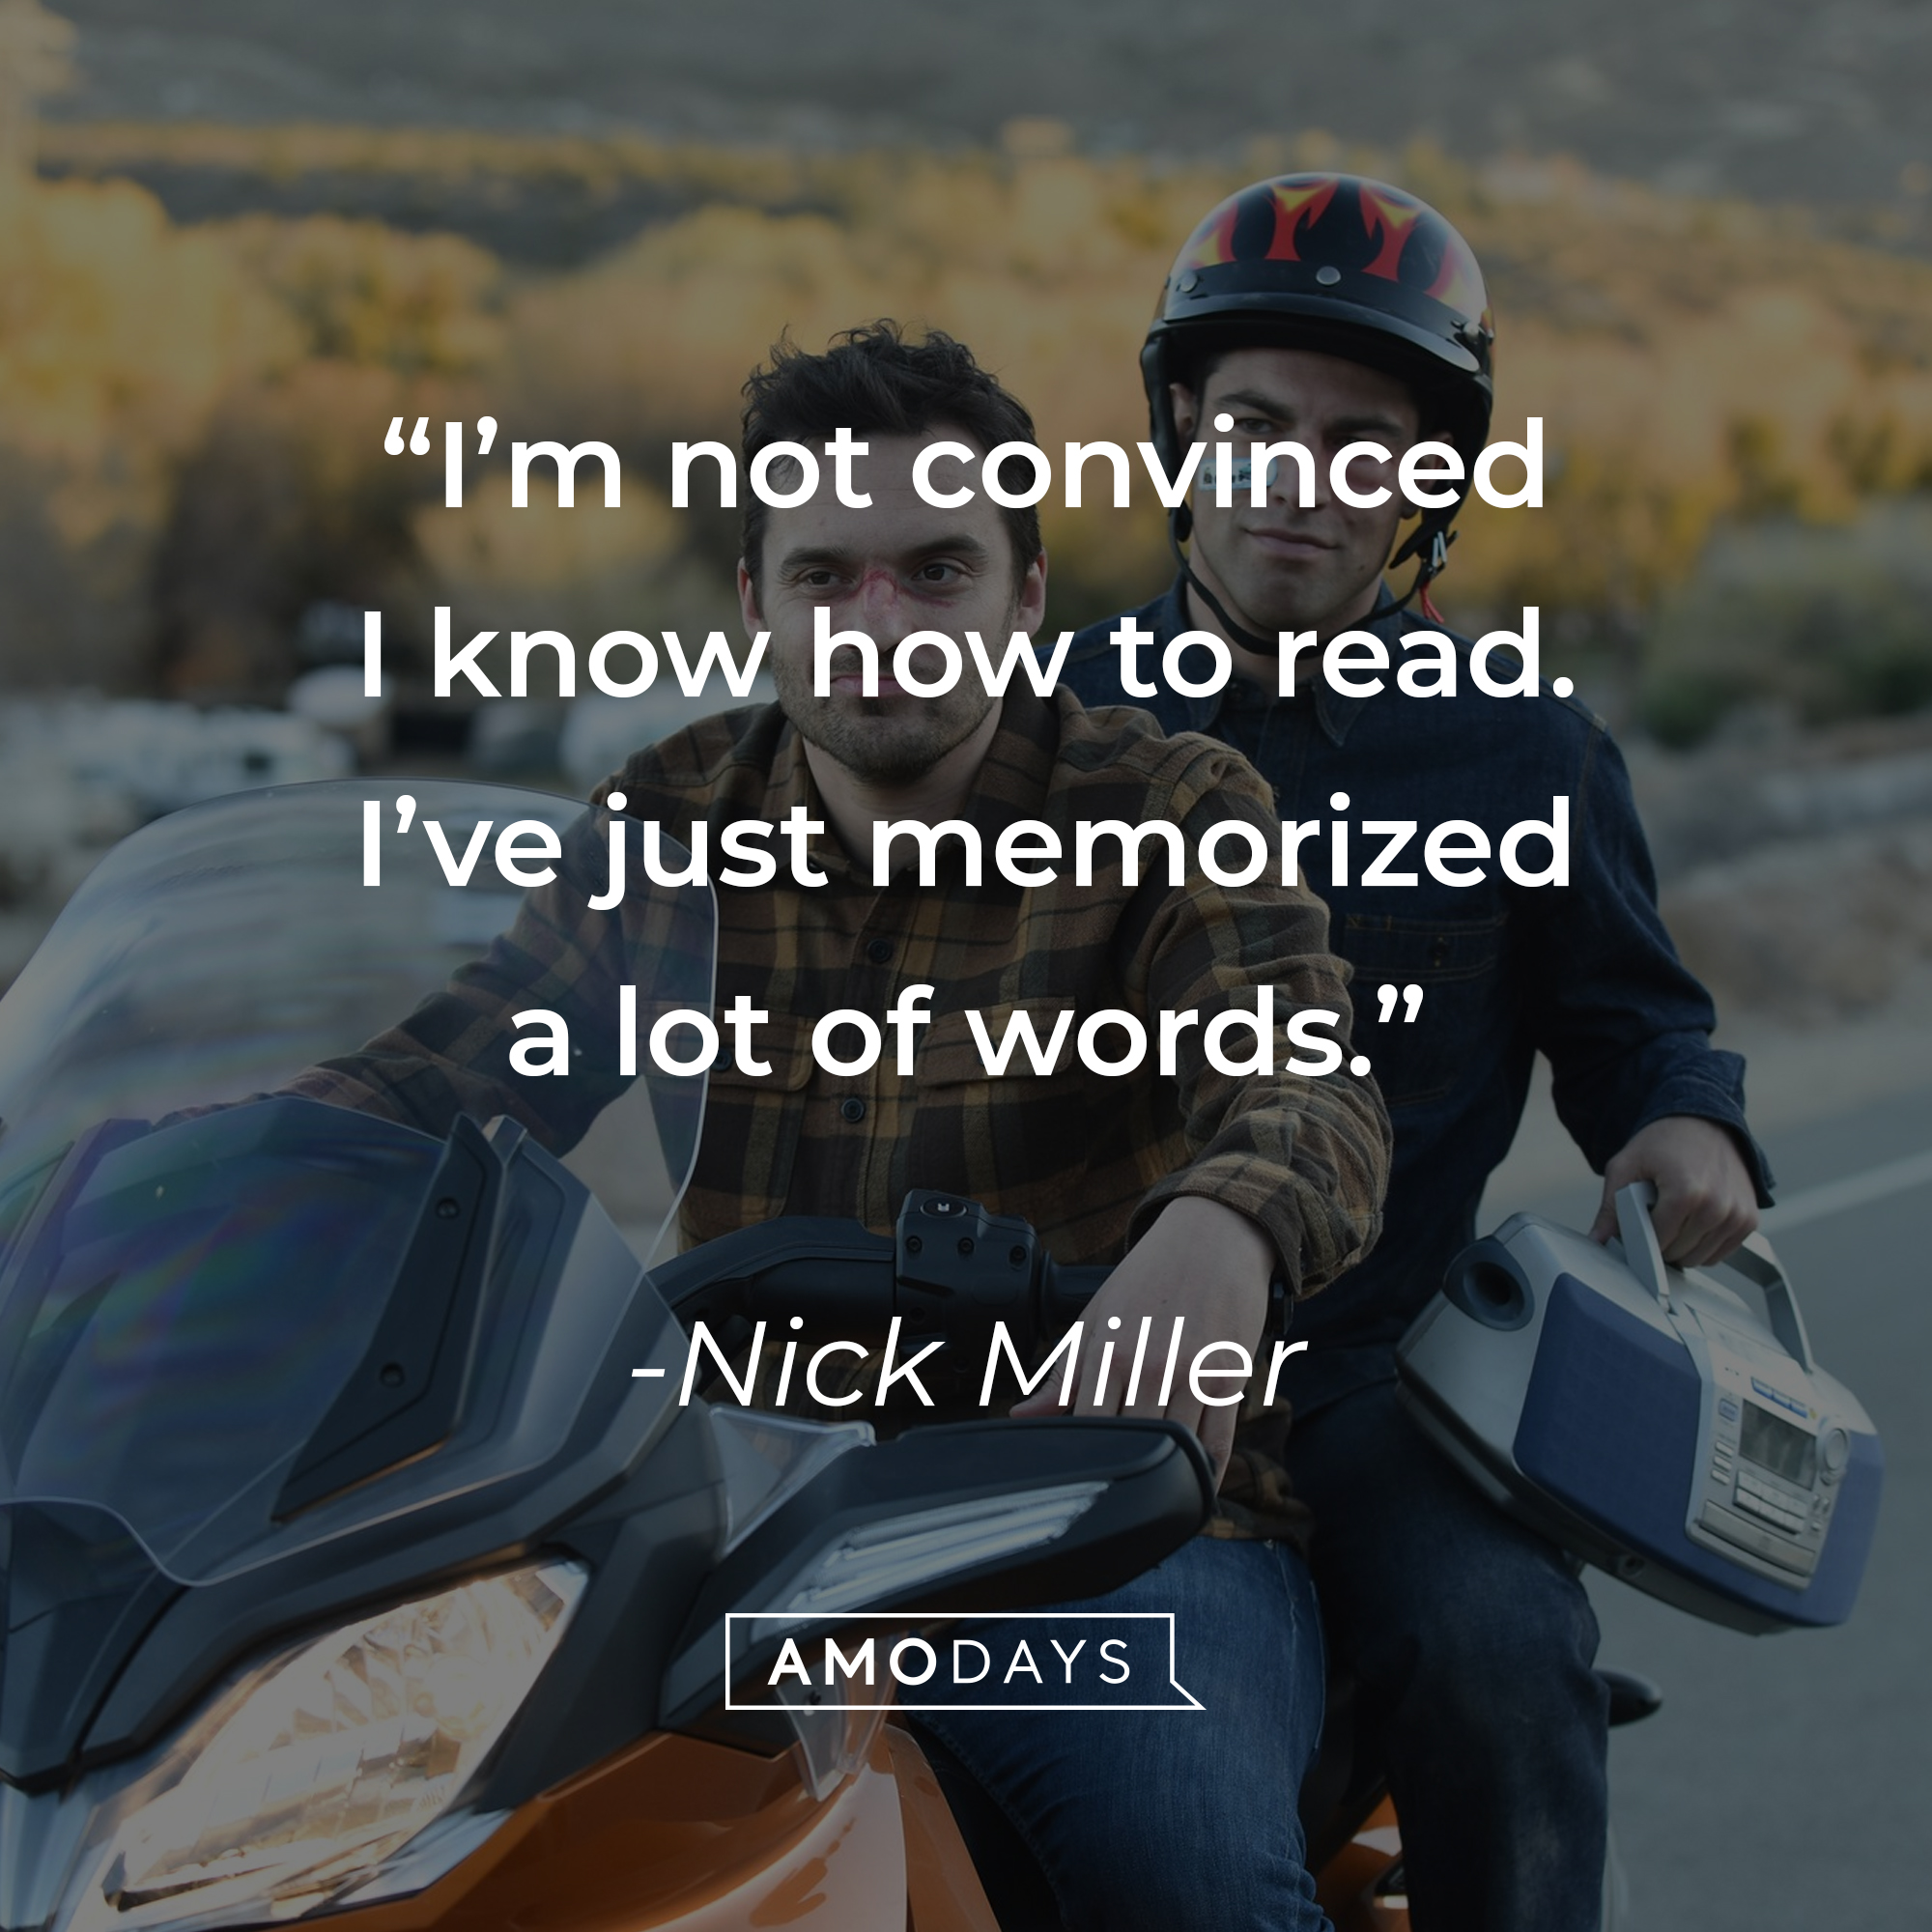 Nick Miller and Schmidt with Miller’s quote: “I’m not convinced I know how to read. I’ve just memorized a lot of words.”  | Source: facebook.com/OfficialNewGirl